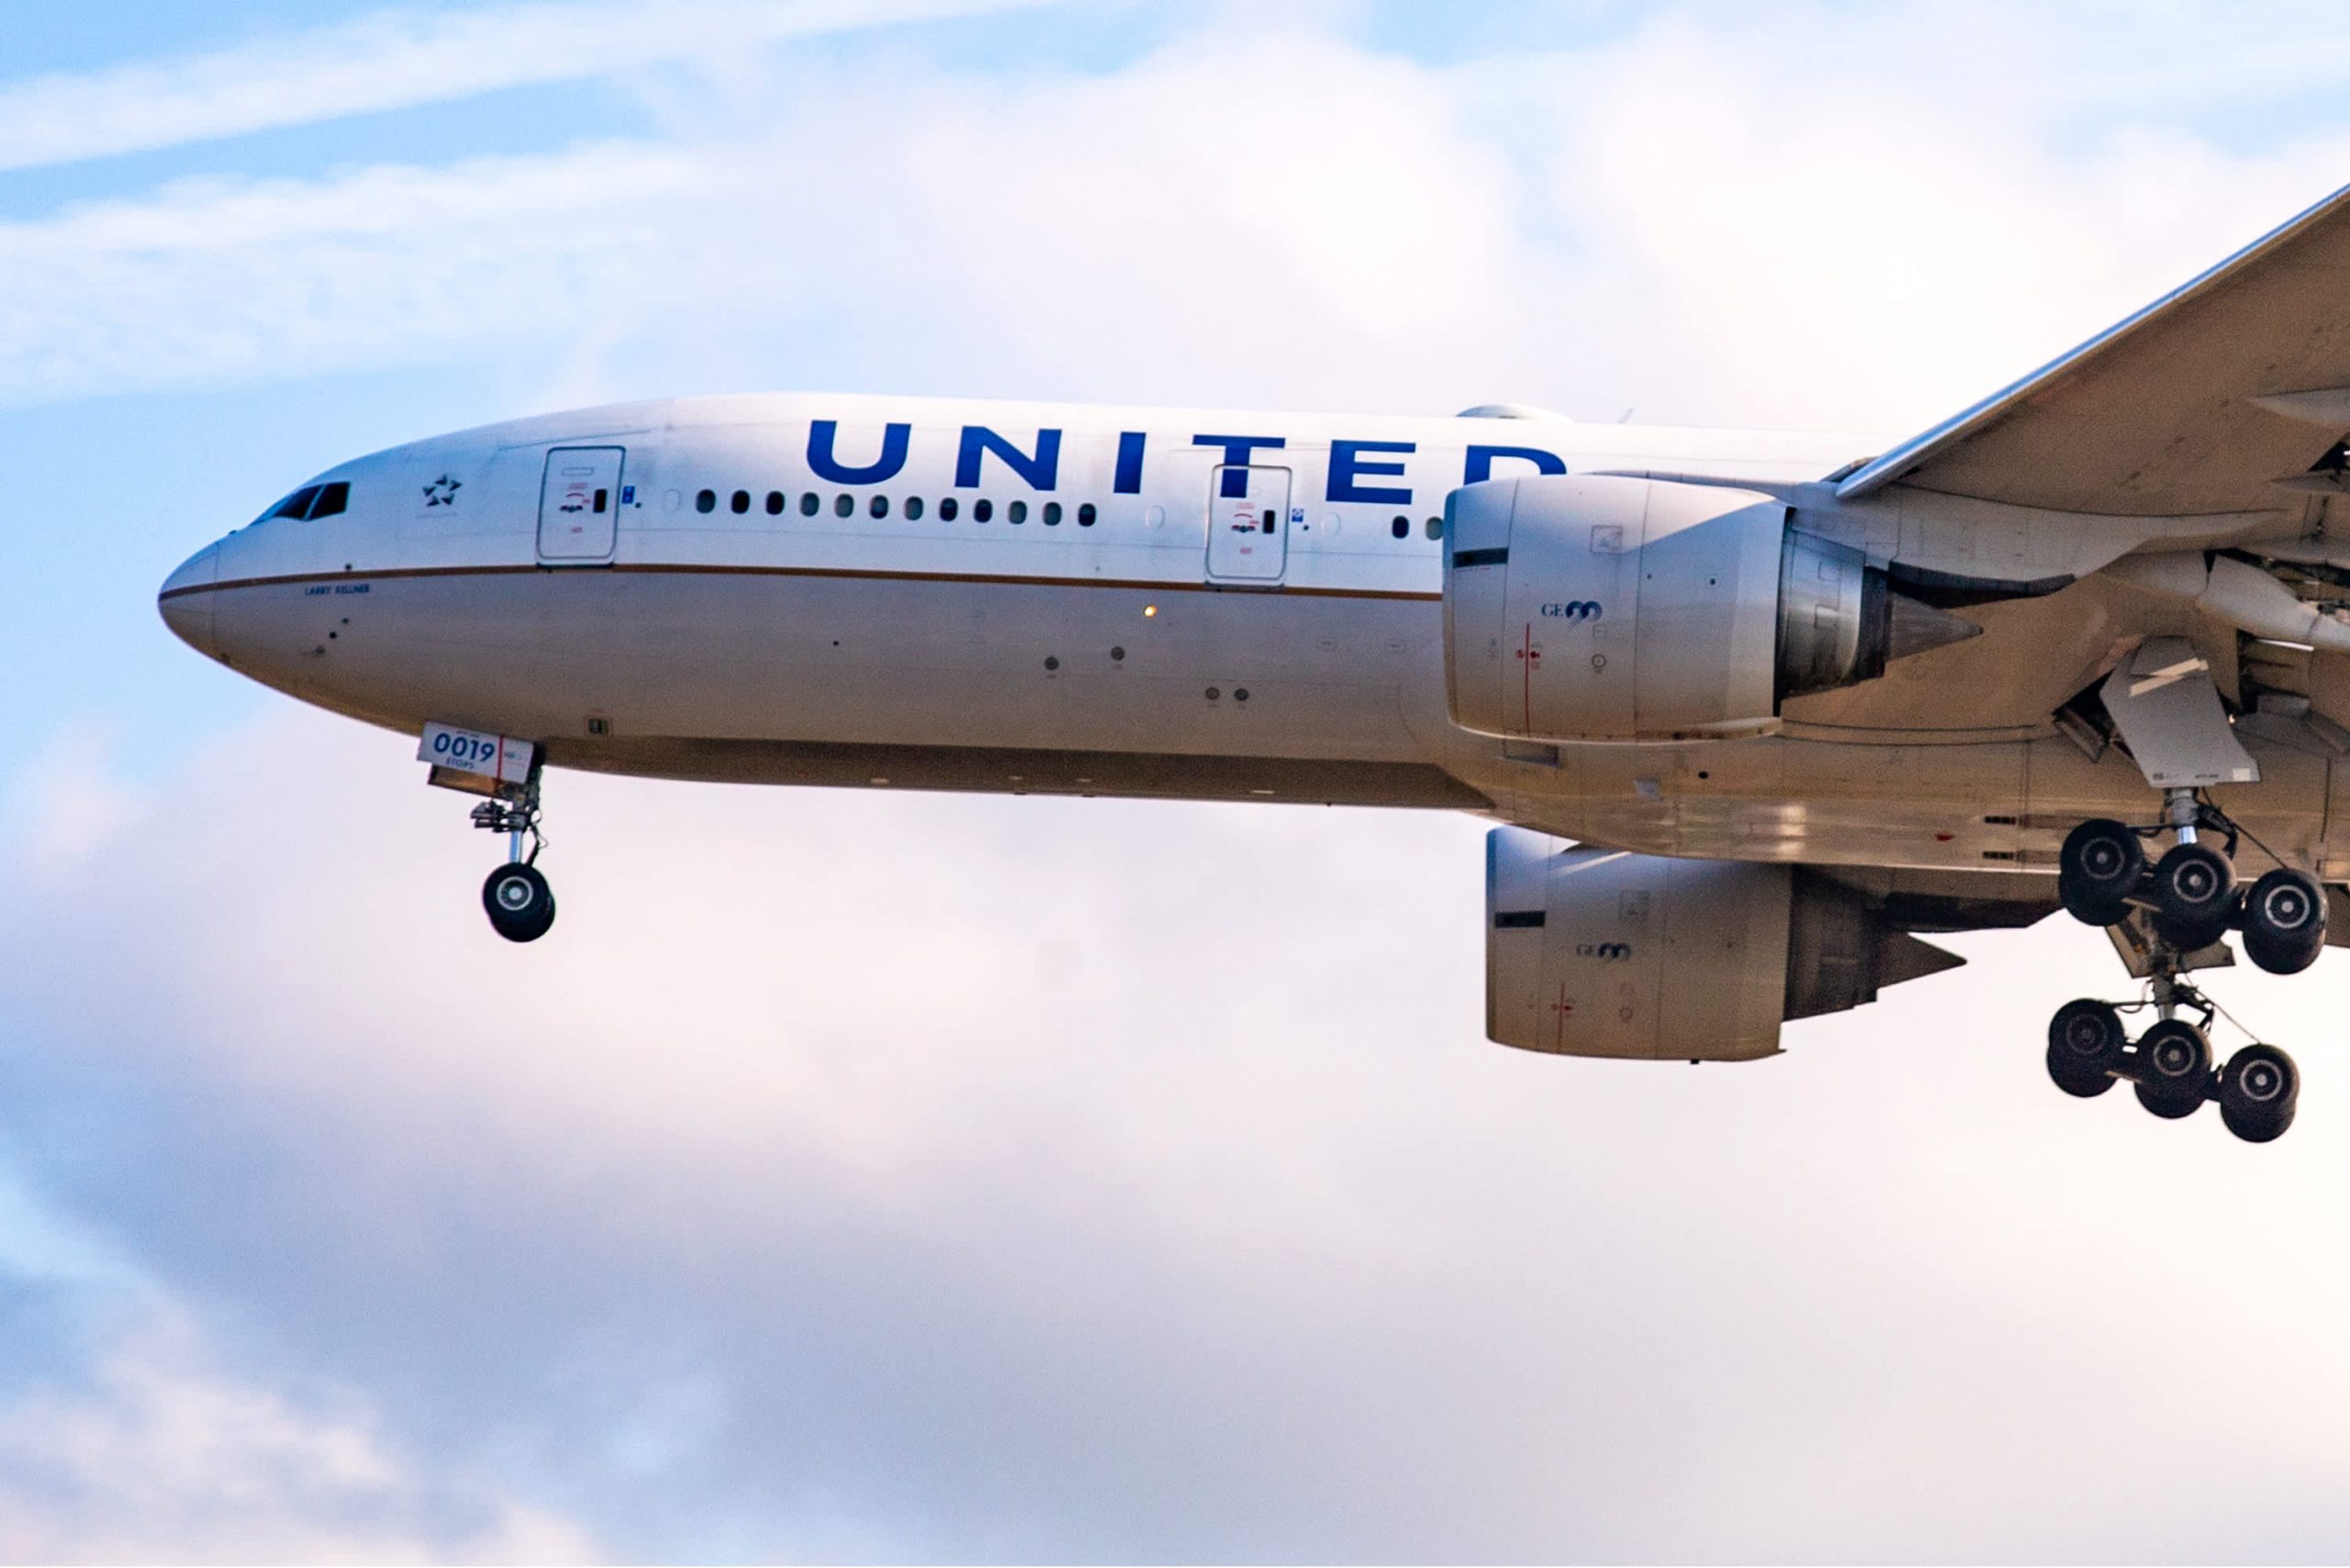 United Boeing 777 suffers engine failure after takeoff from Denver